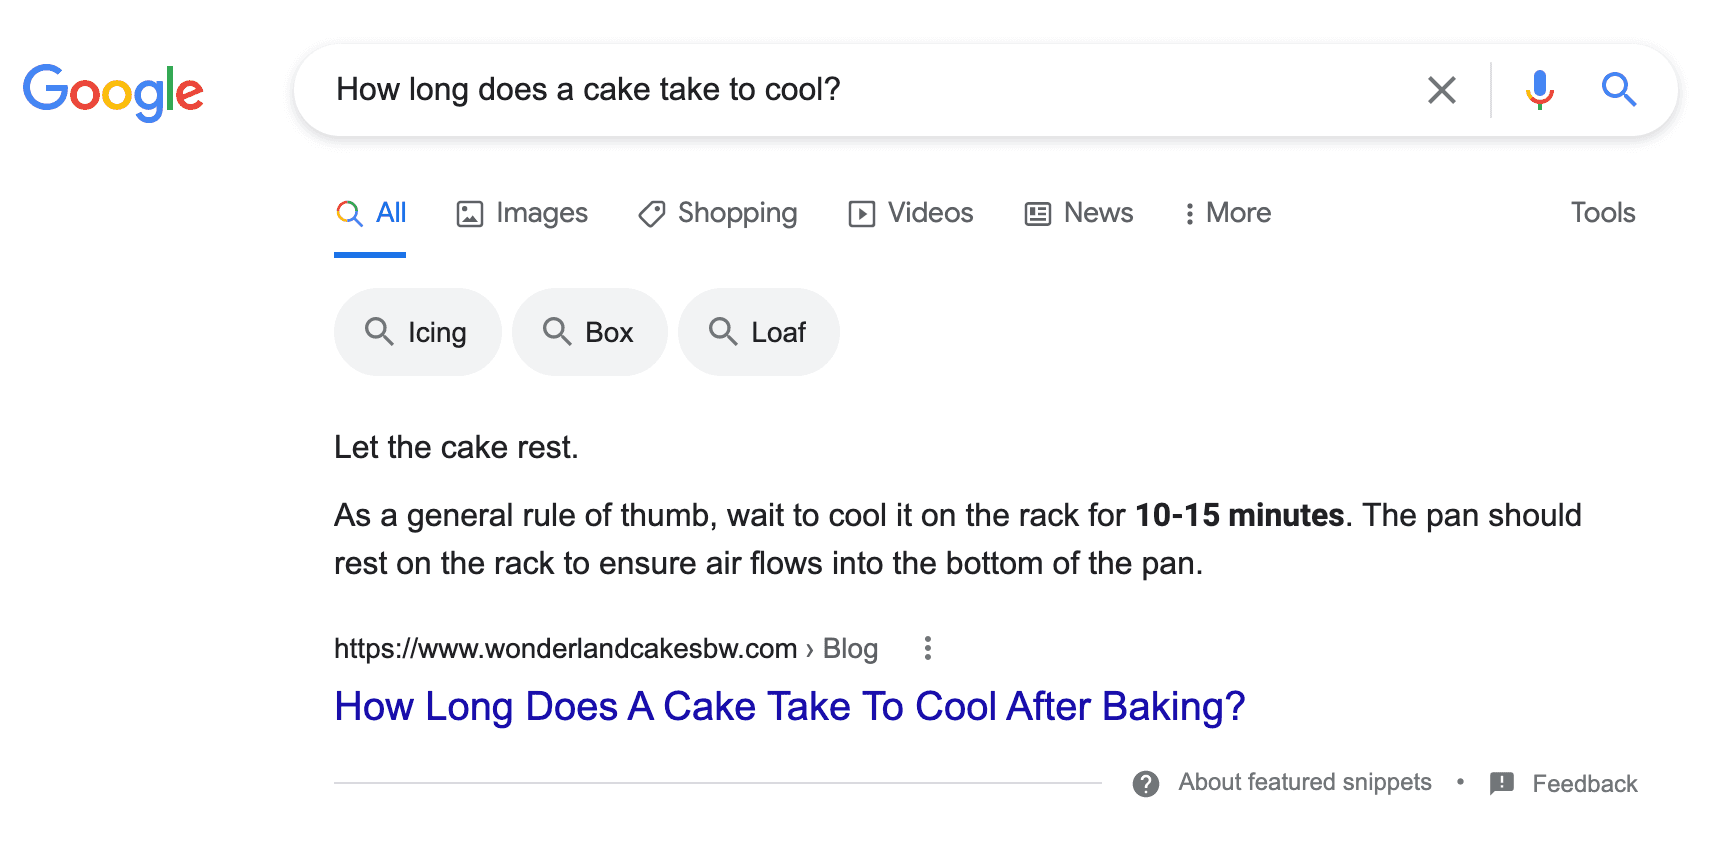 A google search result with a featured snippet answering how long it takes for cakes to cool.